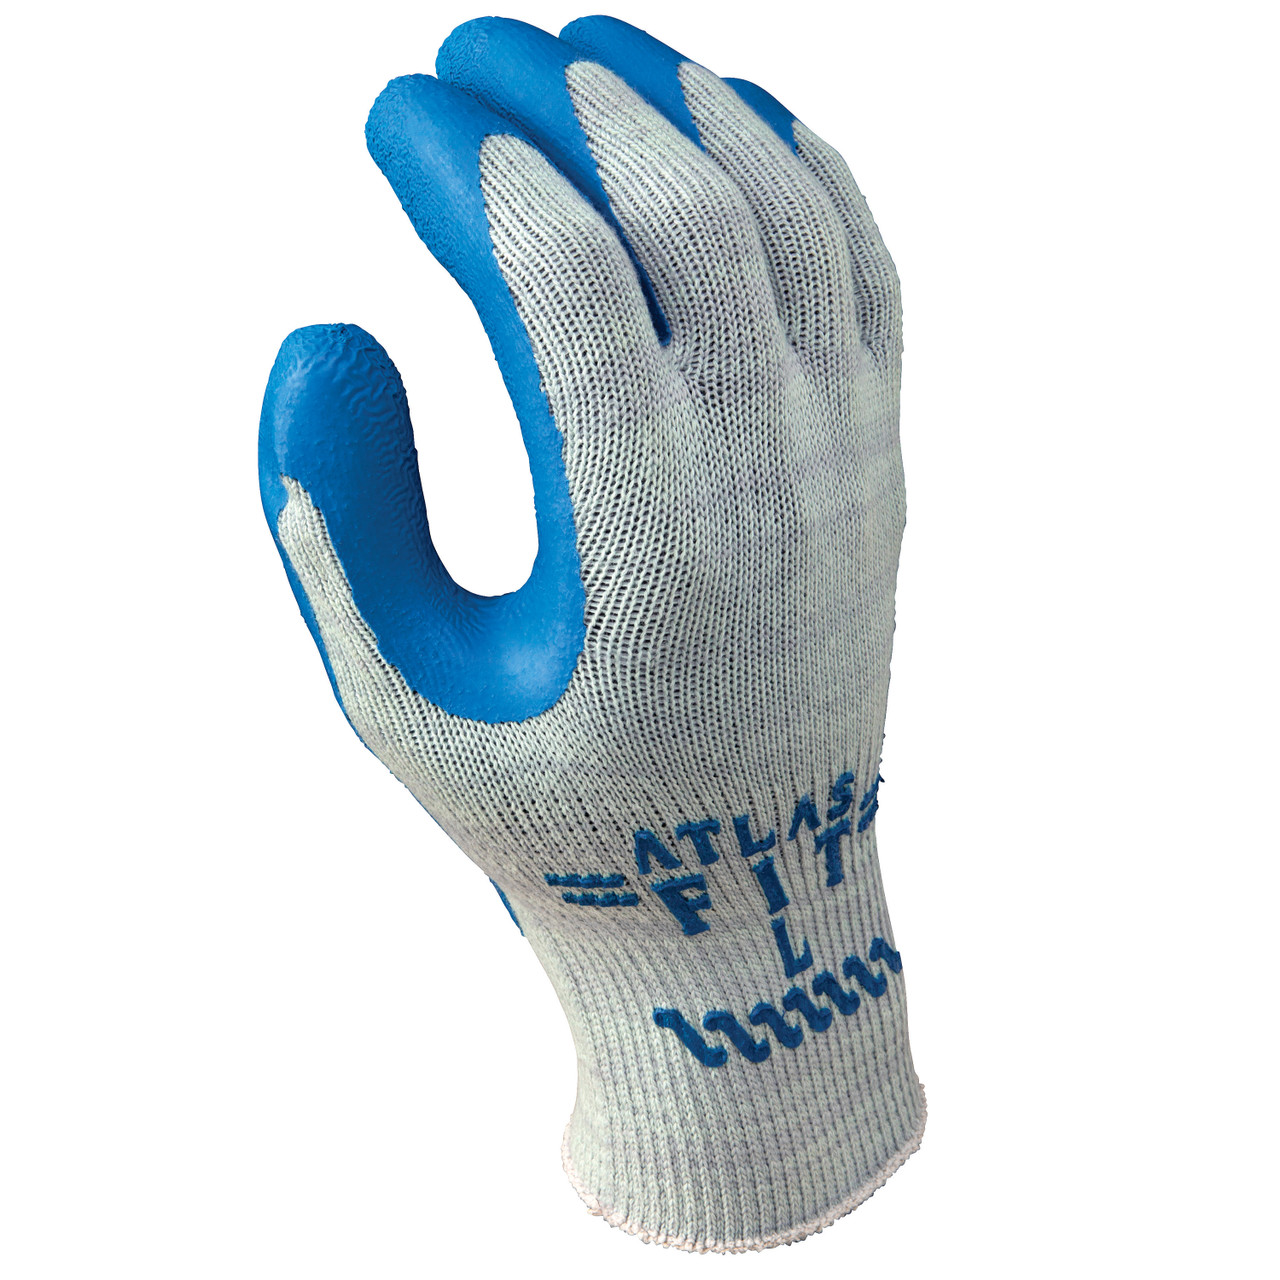 https://cdn11.bigcommerce.com/s-a5uwe4c7wz/images/stencil/1280x1280/products/1027/2741/Atlas-300-Latex-Dipped-Gloves-Gray-Blue__82792.1703704967.jpg?c=1